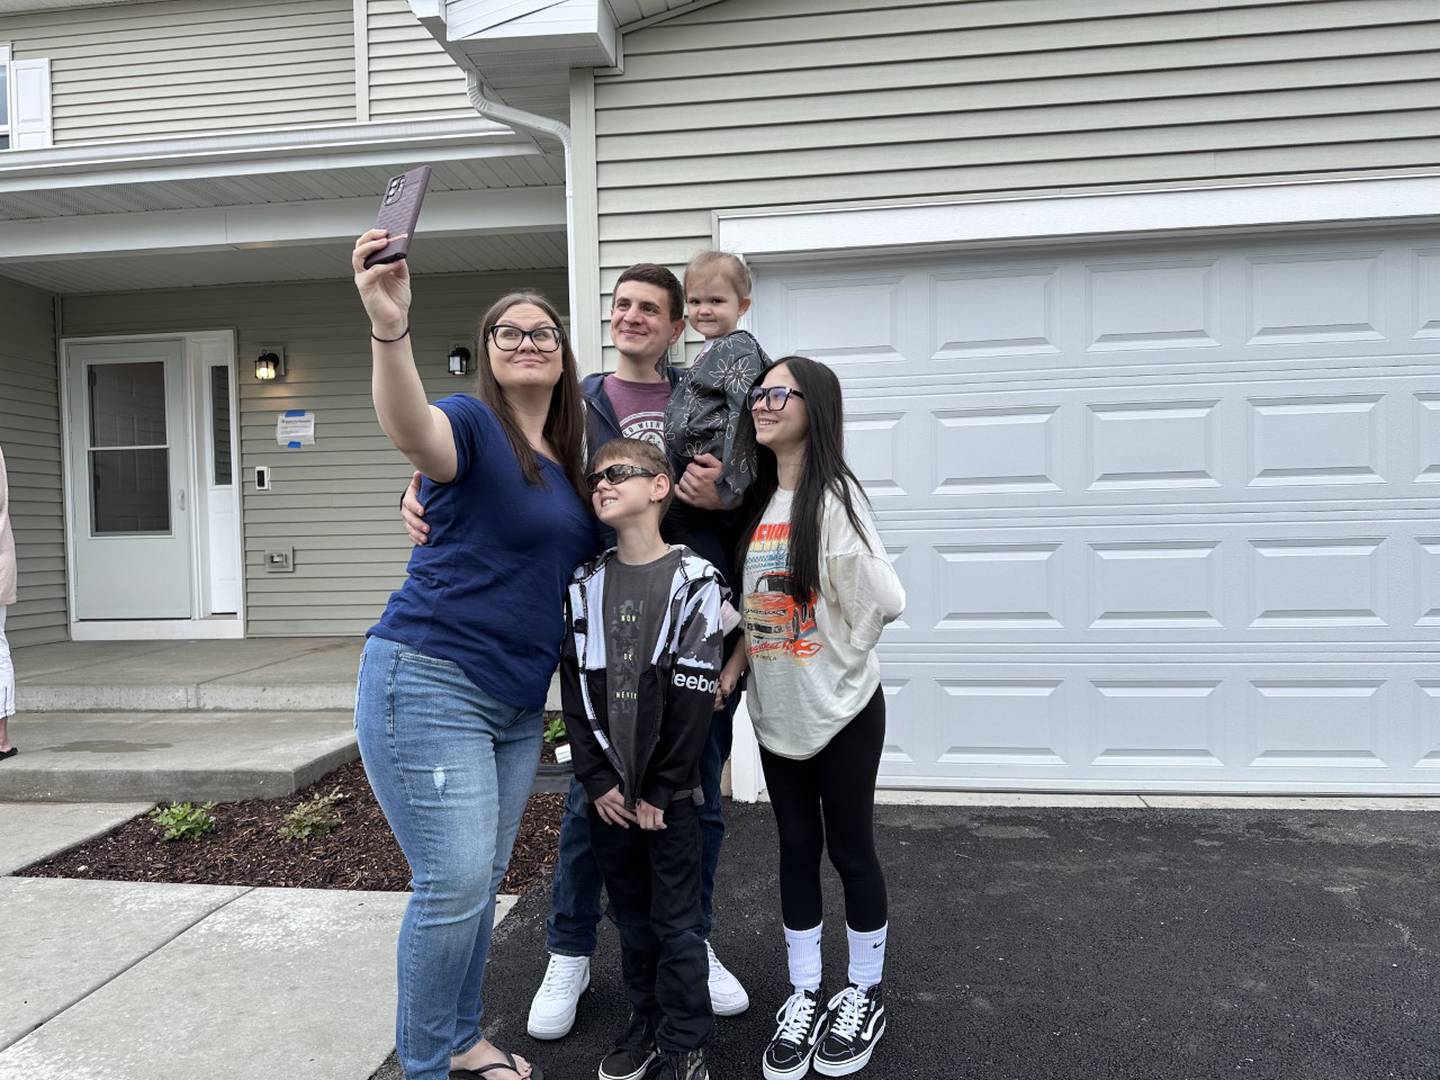 Michael Shelton and his fiancé Amanda Corbin take selfies with their three children, Kaylee Shelton, 13; Brandon Shelton, 11 and Ava Shelton, 3, outside their new Habitat for Humanity home in Wonder Lake on Saturday, May 13.